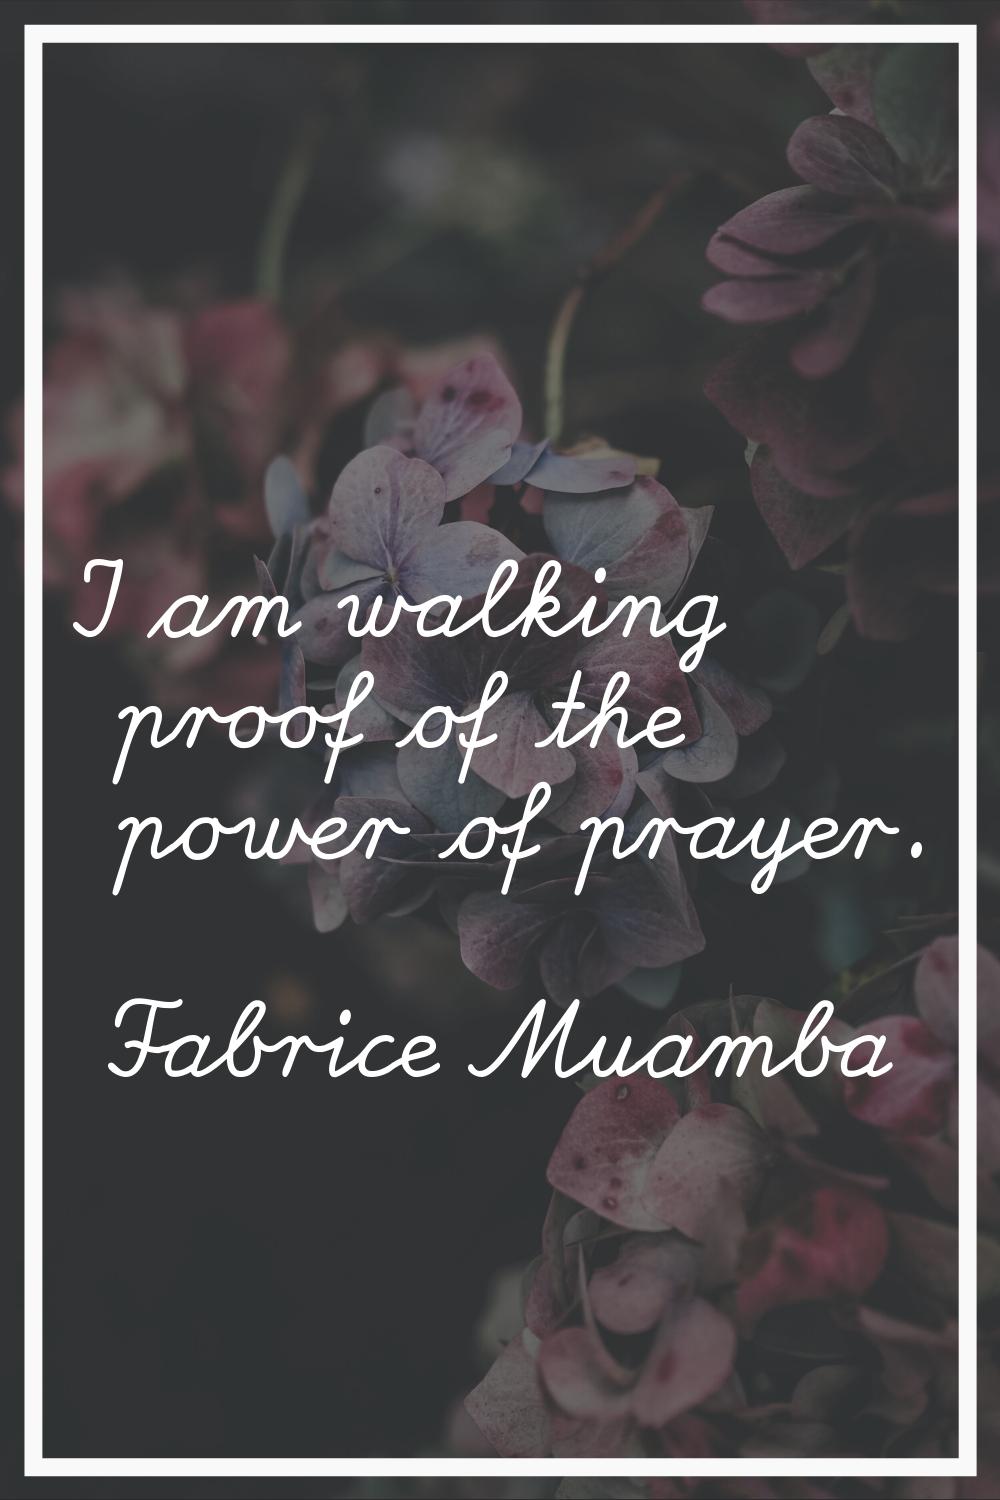 I am walking proof of the power of prayer.